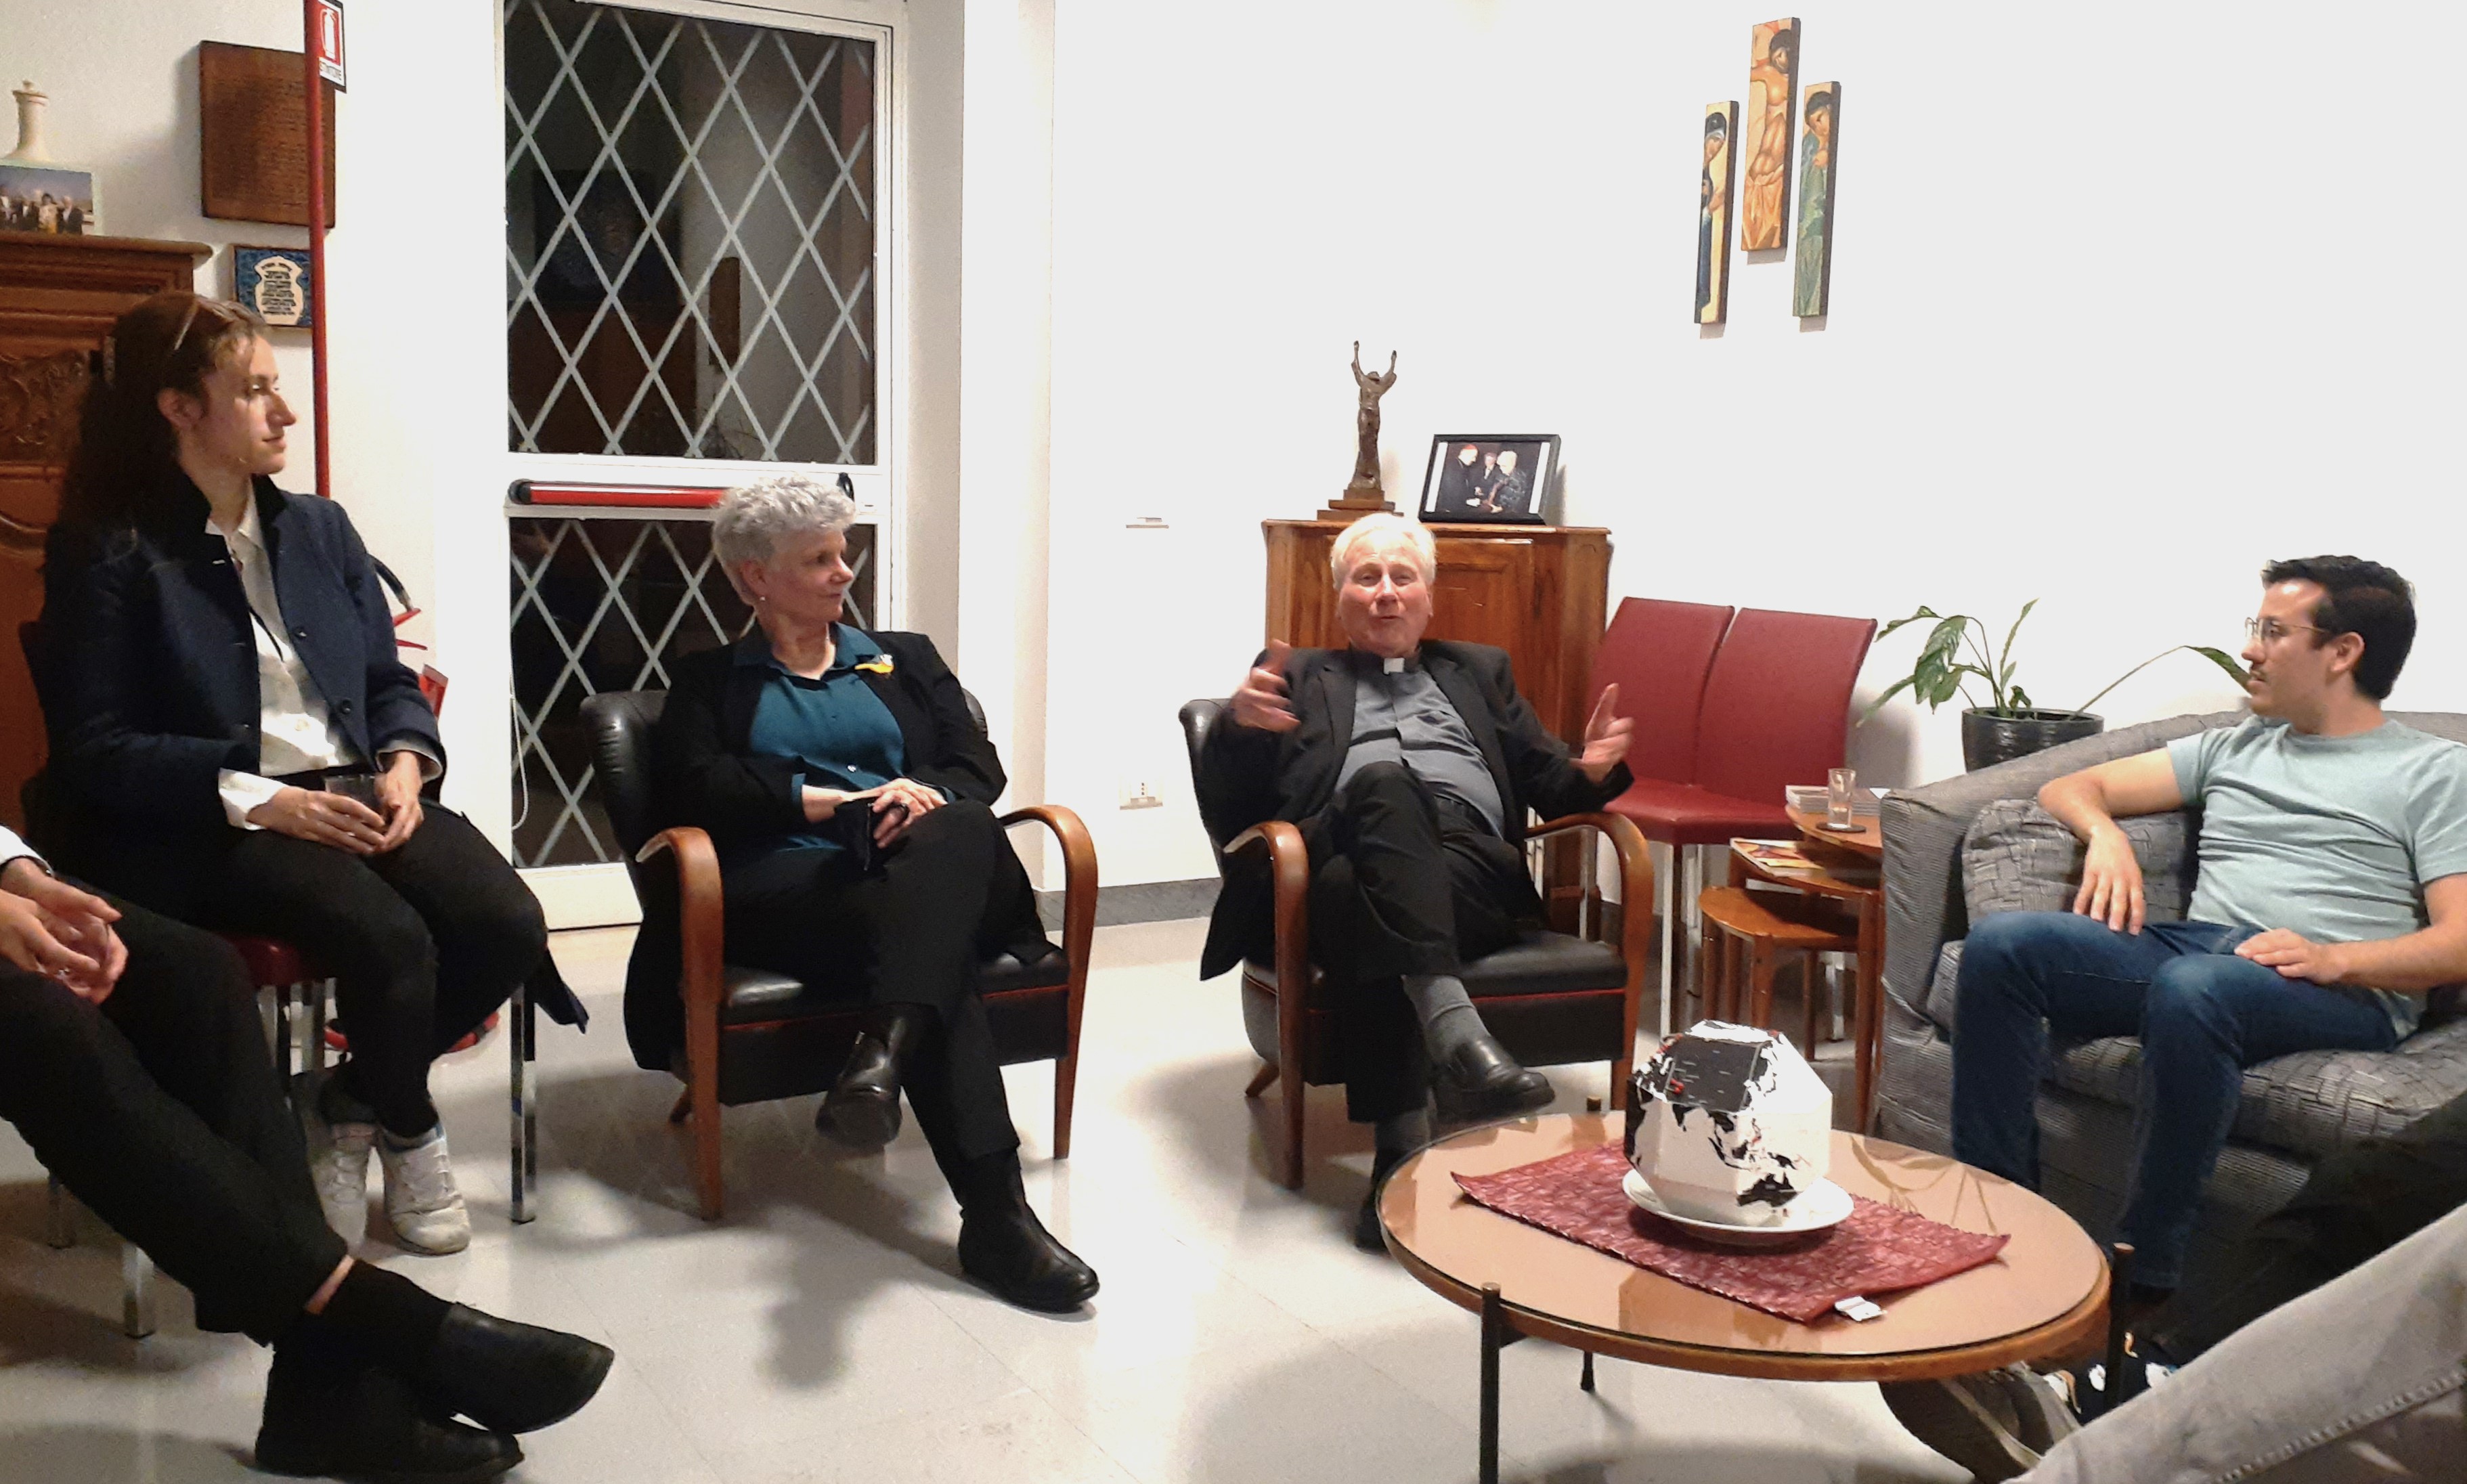 Cardinal Michael Fitzgerald visited The Lay Centre on May 10, 2023